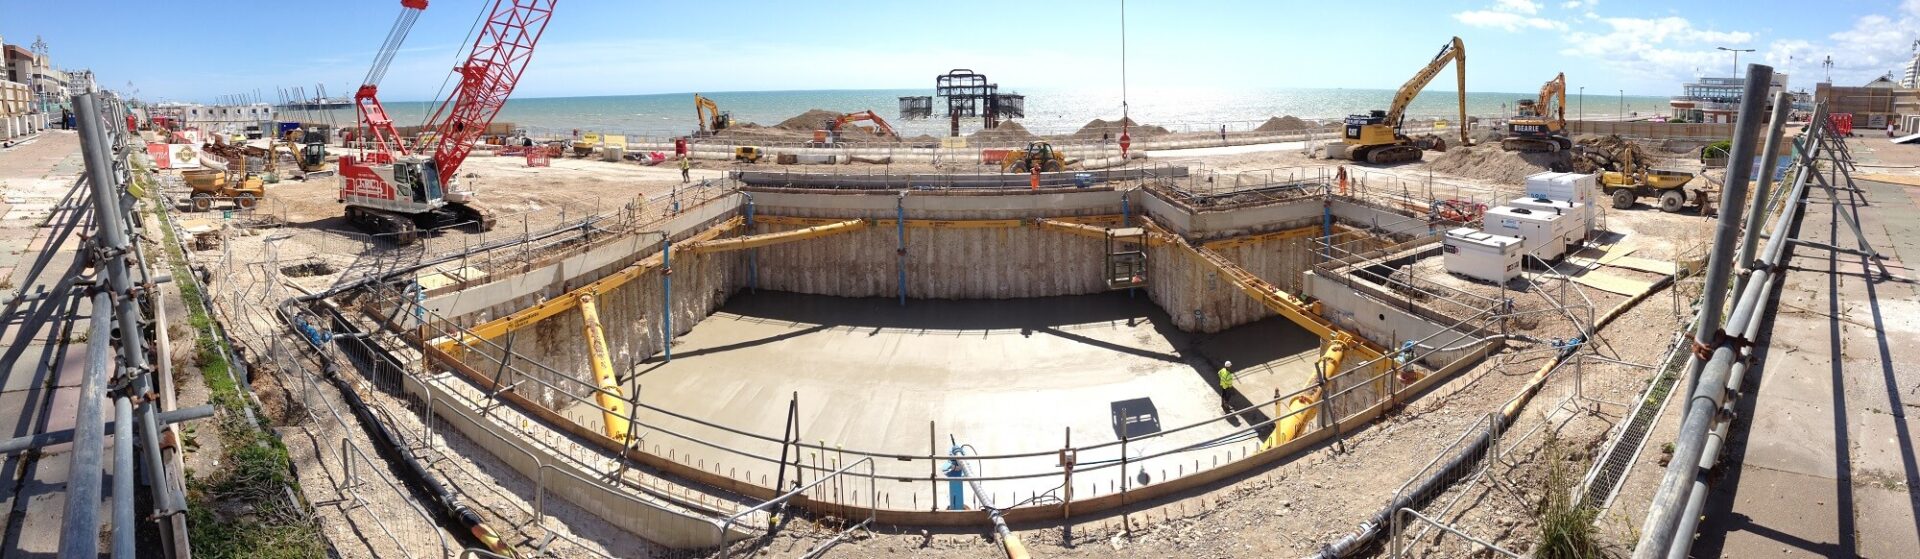 Retaining Wall Solution - BA i360 Tower Project - Secant CFA Wall site photo (7)